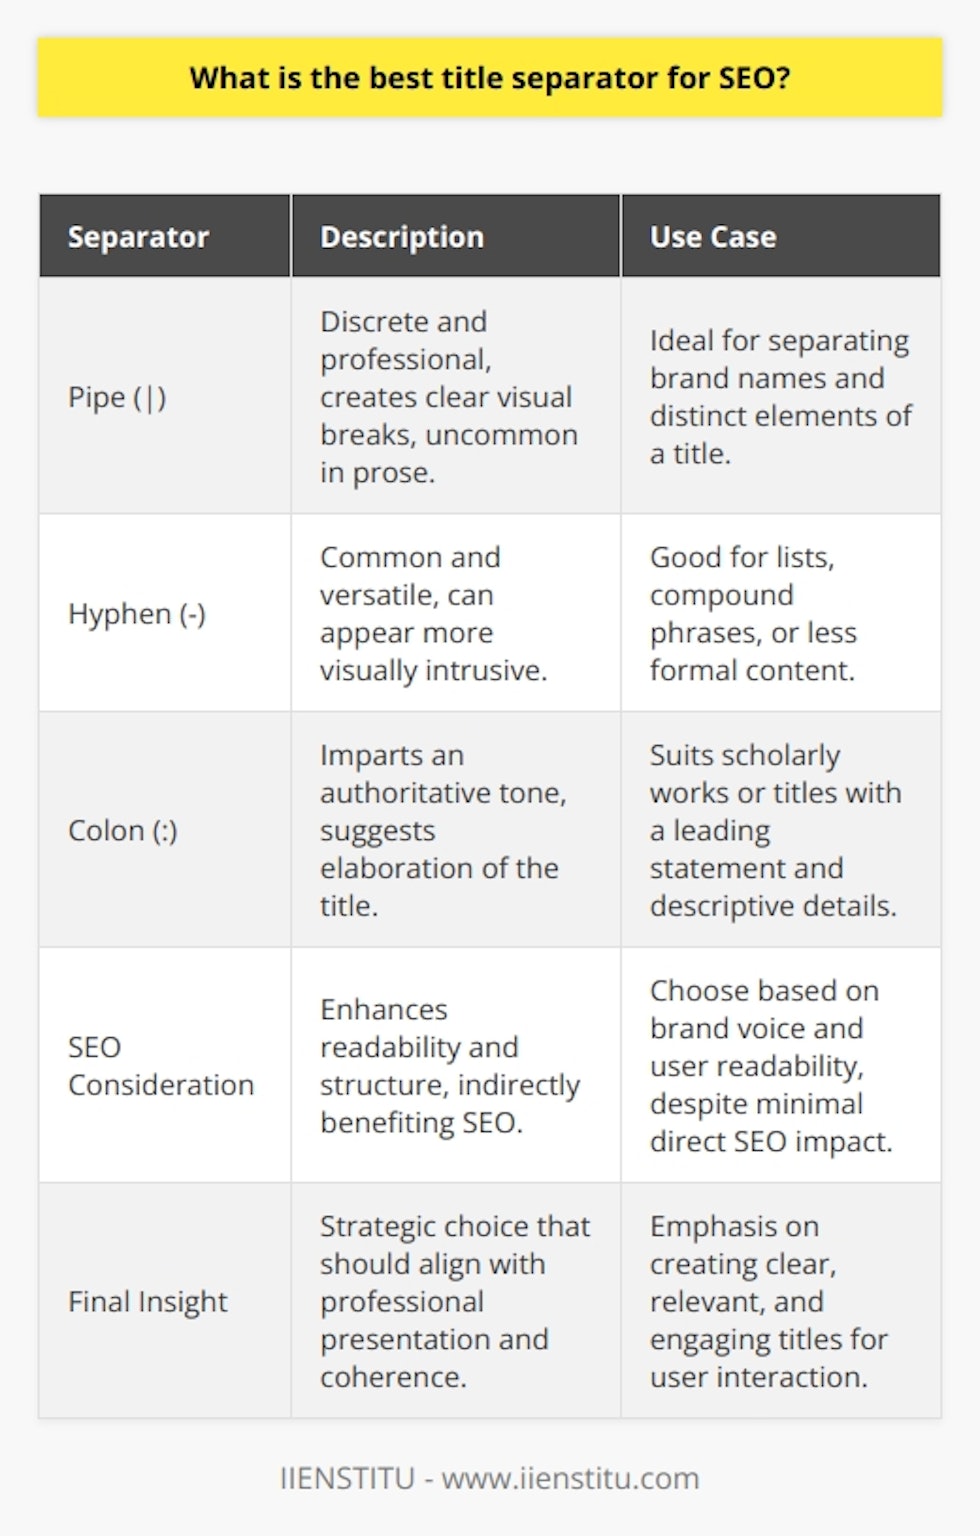 Choosing the Optimal Title Separator for SEOImportance of Title Separators in SEOWhen crafting digital content, the right title separator can help structure metadata effectively, influencing both user experience and search engine rankings. A title tag, which appears in search results, should be both informative and well-formatted to entice users to click through, and the choice of a separator is an integral element of this formatting.Best Practices for Separator Selection1. Pipe (|)The pipe symbol is a favorite in the SEO community for several reasons. It is discrete and professional, which often resonates with a more sophisticated audience. Since it does not commonly appear in standard prose, it serves the specific purpose of delineating segments of text in a title tag without any unintentional interpretations. It provides a visual break that allows the main points of the title to stand out and is perfect for separating a brand name, such as IIENSTITU, from the rest of the title.2. Hyphen (-)More natural in everyday writing, the hyphen is a versatile and widely accepted separator. Although it can be more visually intrusive than the pipe, it creates a friendly feel and is less formal. Hyphens can sometimes be interpreted as connectors rather than separators, which is why their use might be more context-dependent. For lists or compound phrases, hyphens may be ideal.3. Colon (:)Employing a colon in a title tag can impart an authoritative and explanatory tone. It creates an expectation that the following text will elaborate on the preceding text. Often used in scholarly articles and book chapters, colons are beneficial when the title includes a leading statement or a thematic premise followed by descriptive details. However, the colon can come off as overly formal for certain types of content and audiences.SEO Impact and ConsiderationsIn the realm of SEO, content reigns supreme over the specific character employed to separate a title. Google's algorithms are designed to assess the relevance and clarity of the content itself. However, the proper use of separators can enhance readability and structure which indirectly benefits SEO by improving user interaction metrics.Final ThoughtsThe most suitable title separator is ultimately a strategic choice that aligns with the brand's voice and user readability. Whether selecting the pipe, hyphen, or colon, the emphasis should be on creating clear, relevant, and engaging titles. While the actual impact of the separator on SEO is minimal, its contribution to a professional and coherent presentation should not be underestimated. Professionals at IIENSTITU and other digital marketing specialists understand the nuanced role punctuation plays in the broader scenario of web optimization and brand messaging.